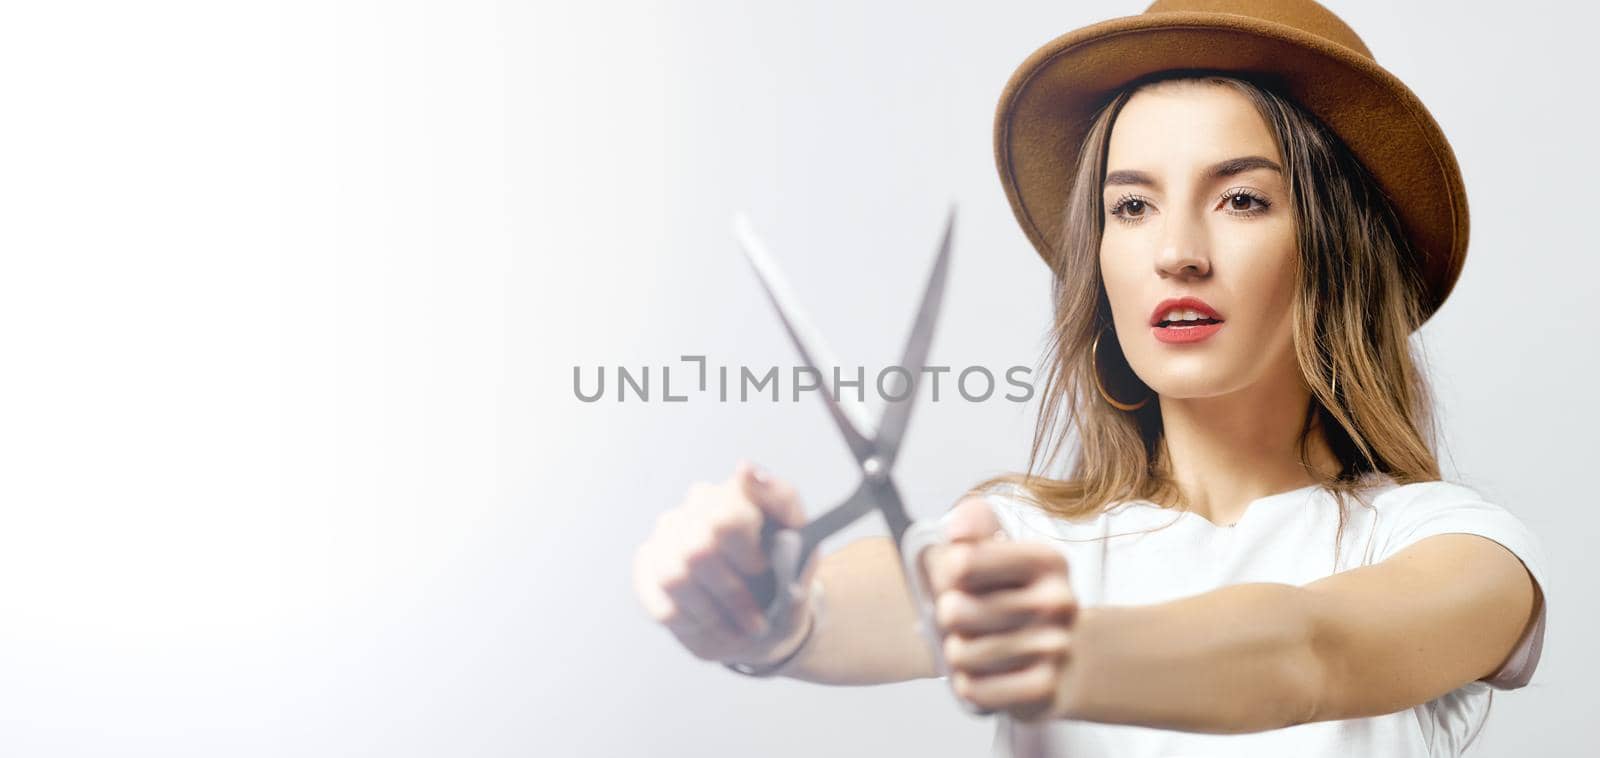 A woman wearing a hat looking through scissors hight quality 